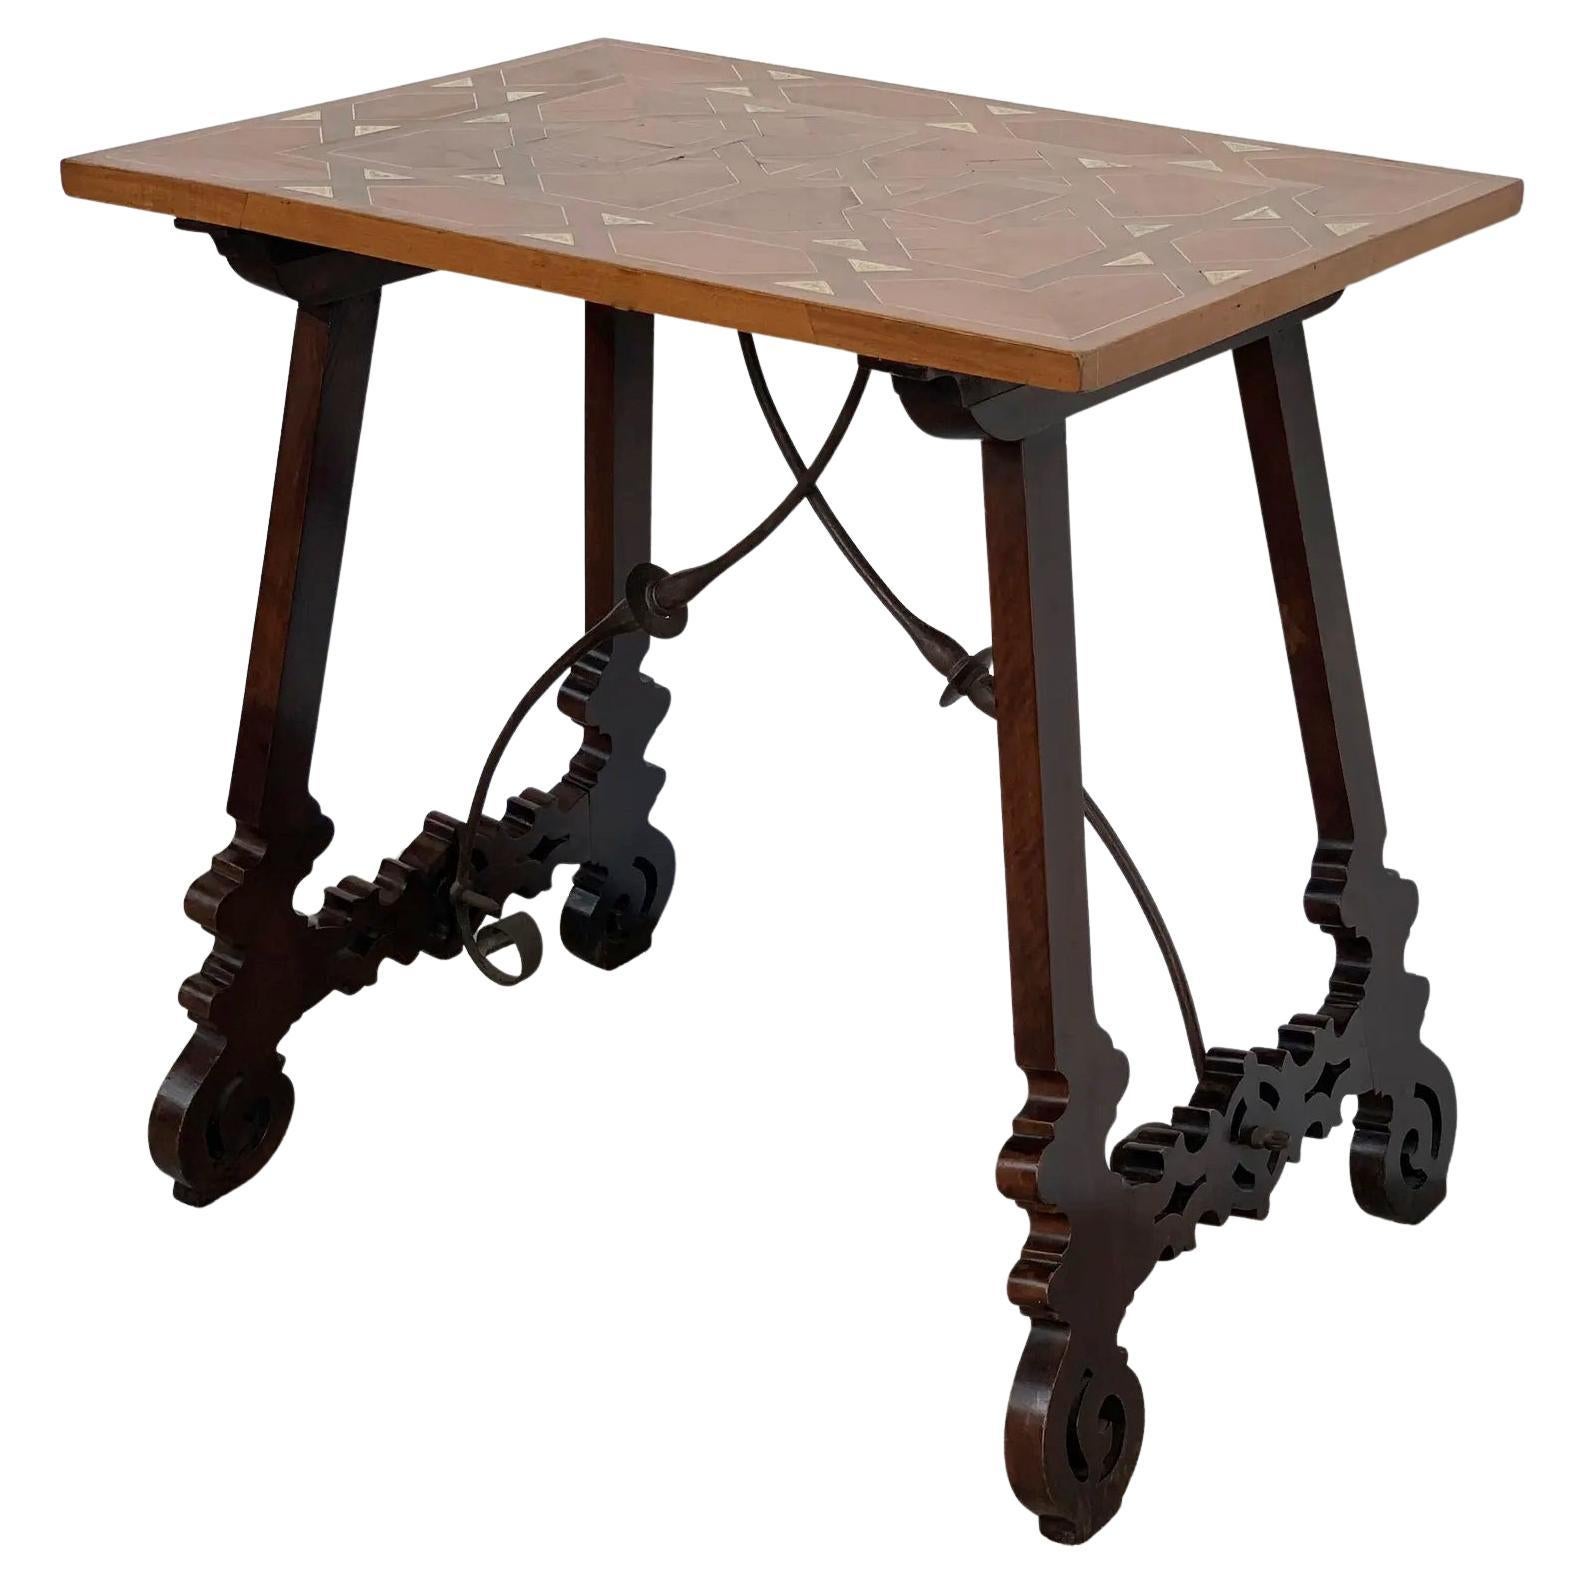 19th Century Baroque Spanish Side Table with Marquetry Top and Lyre Carved Legs